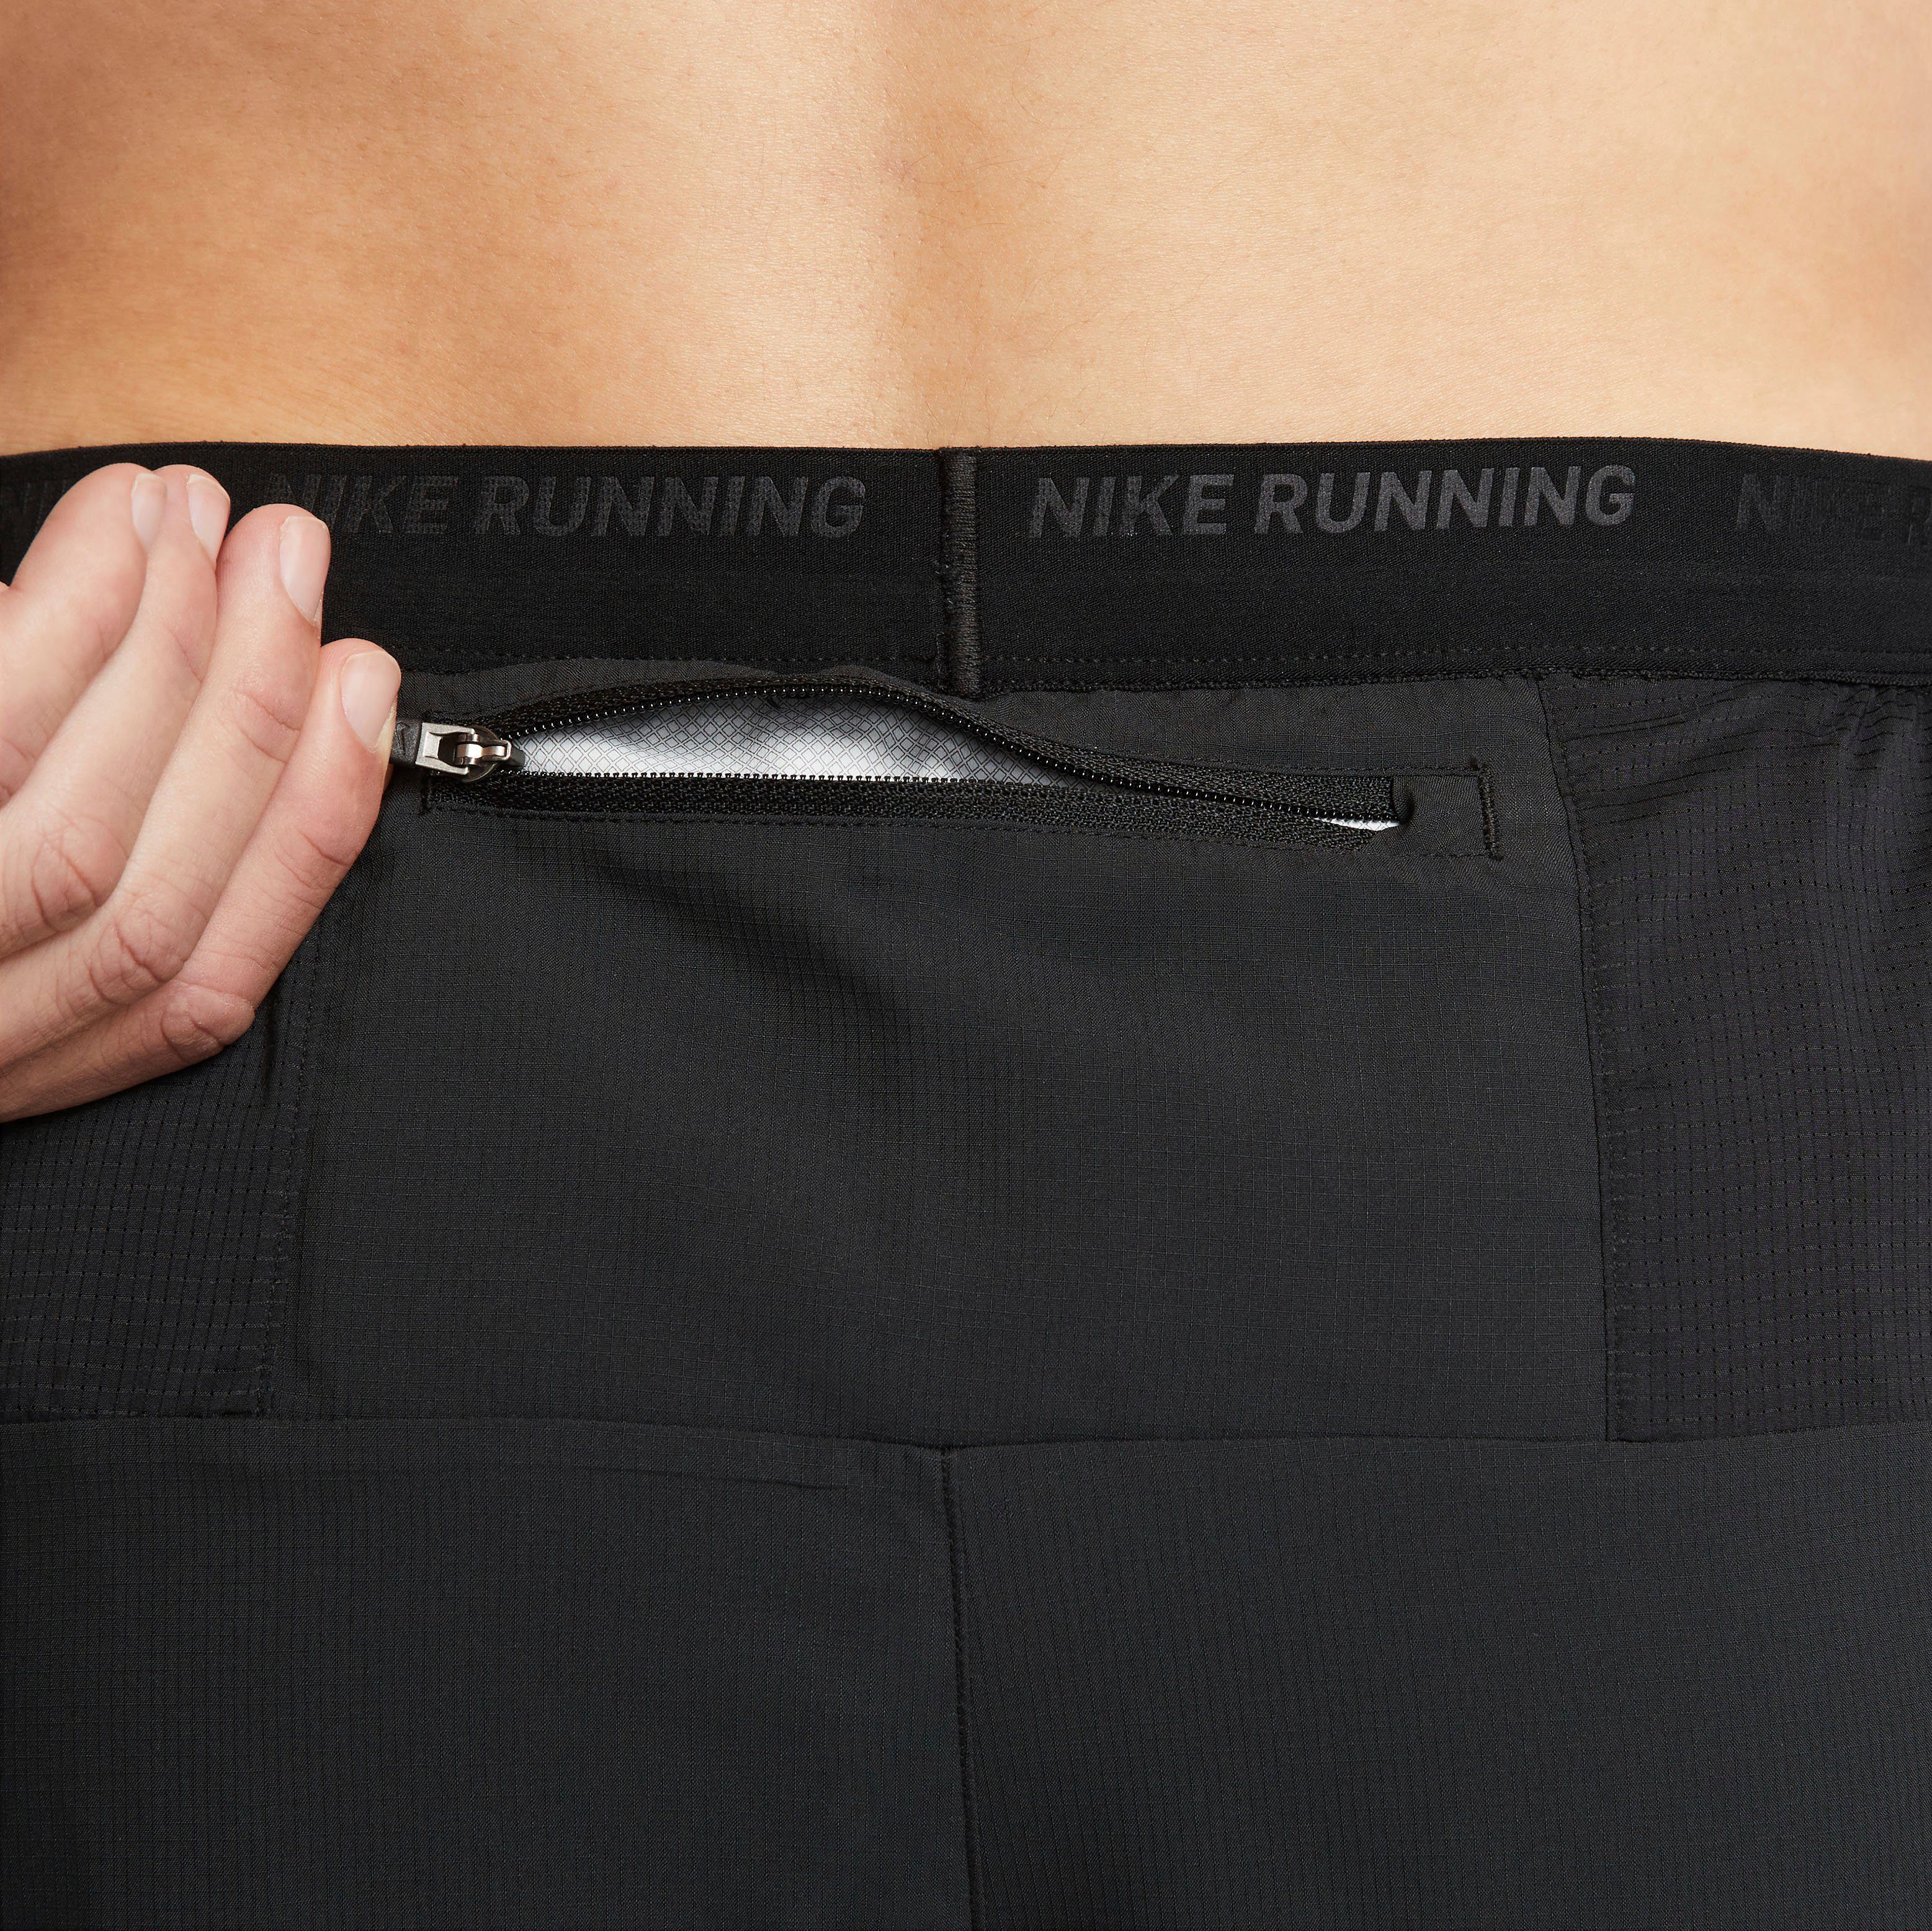 Dri-FIT " Brief-Lined Nike Shorts Laufshorts Running Men's Stride